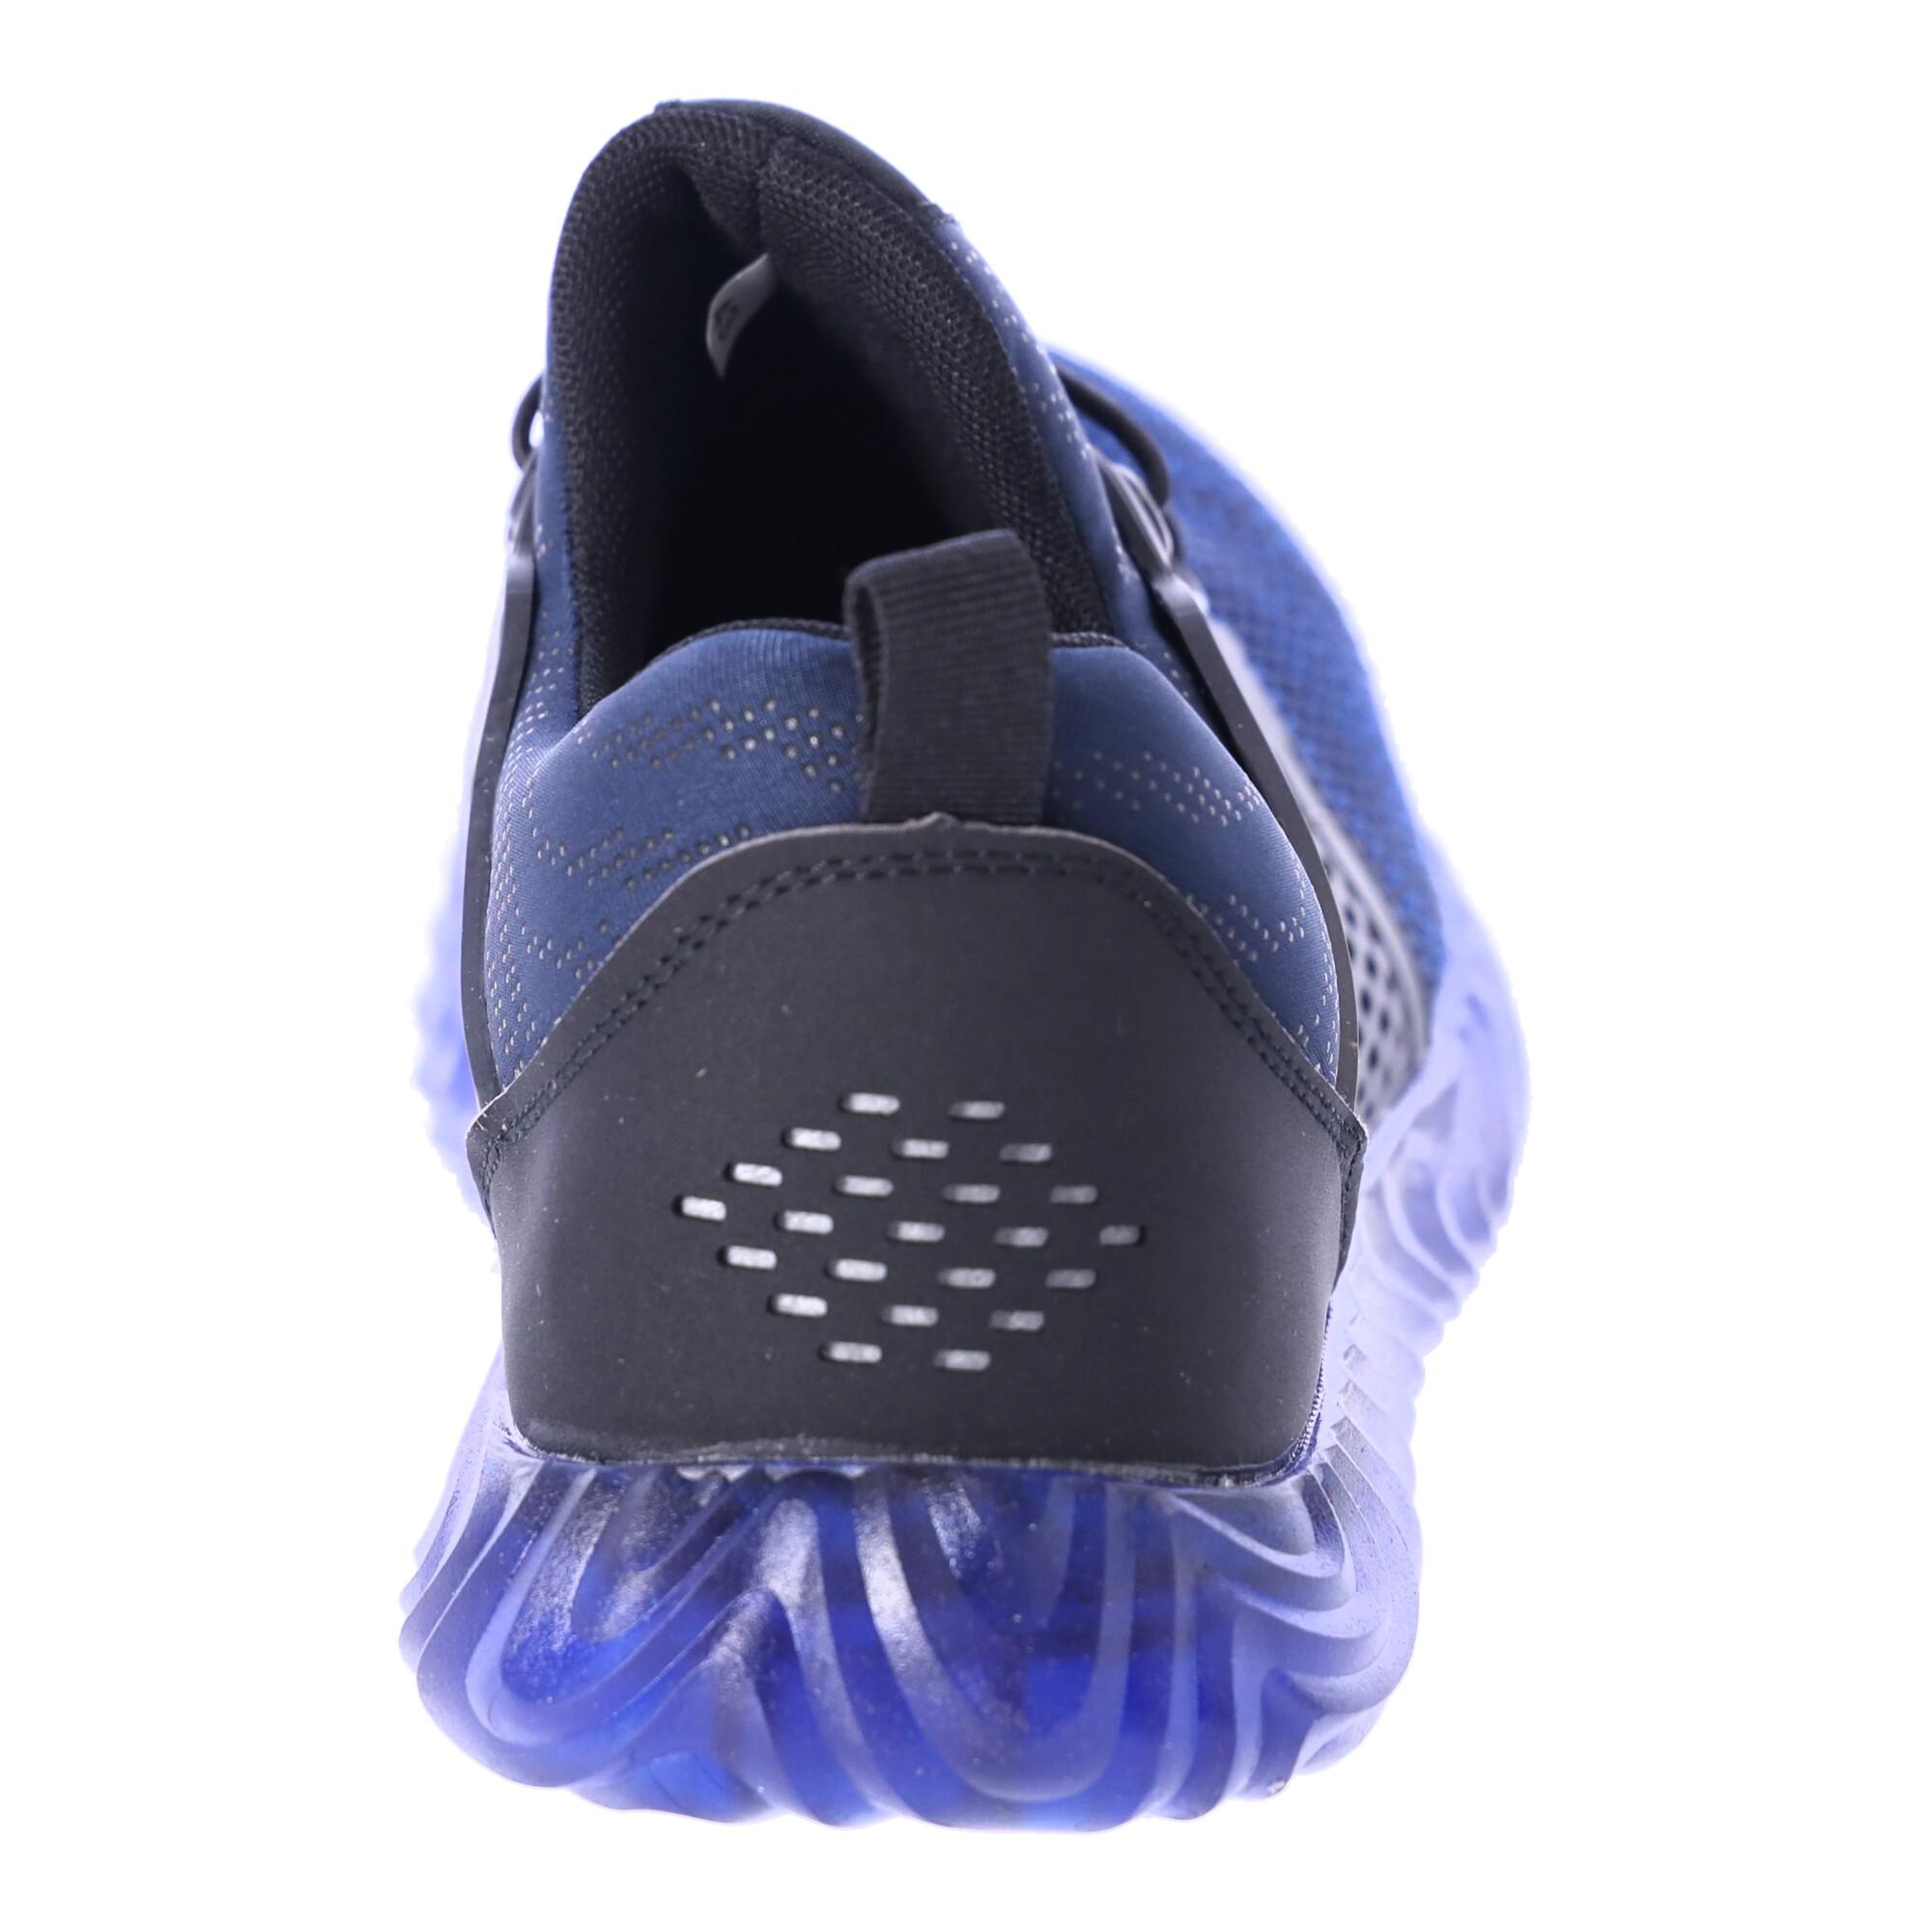 Work safety shoes "42" - navy blue